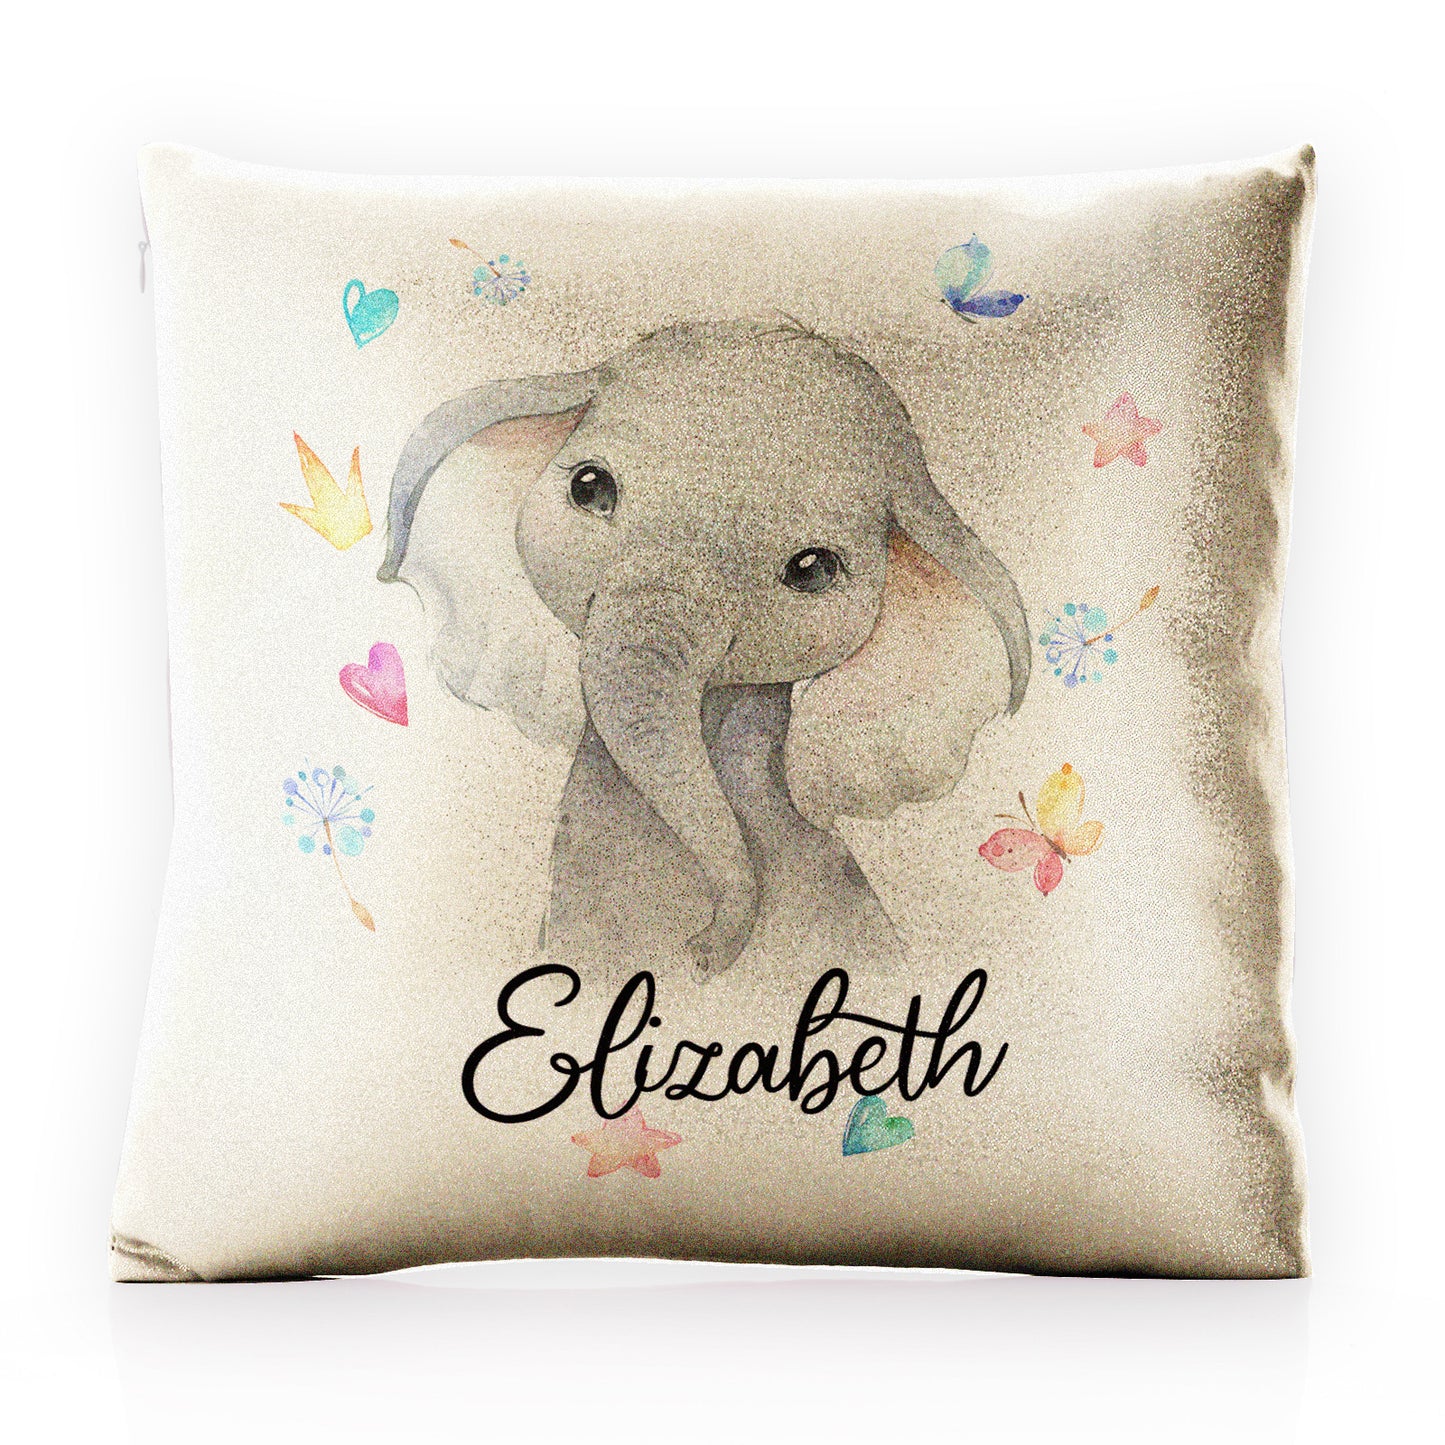 Personalised Glitter Cushion with Grey Elephant with Hearts Stars Crowns Butterfly and Cute Text